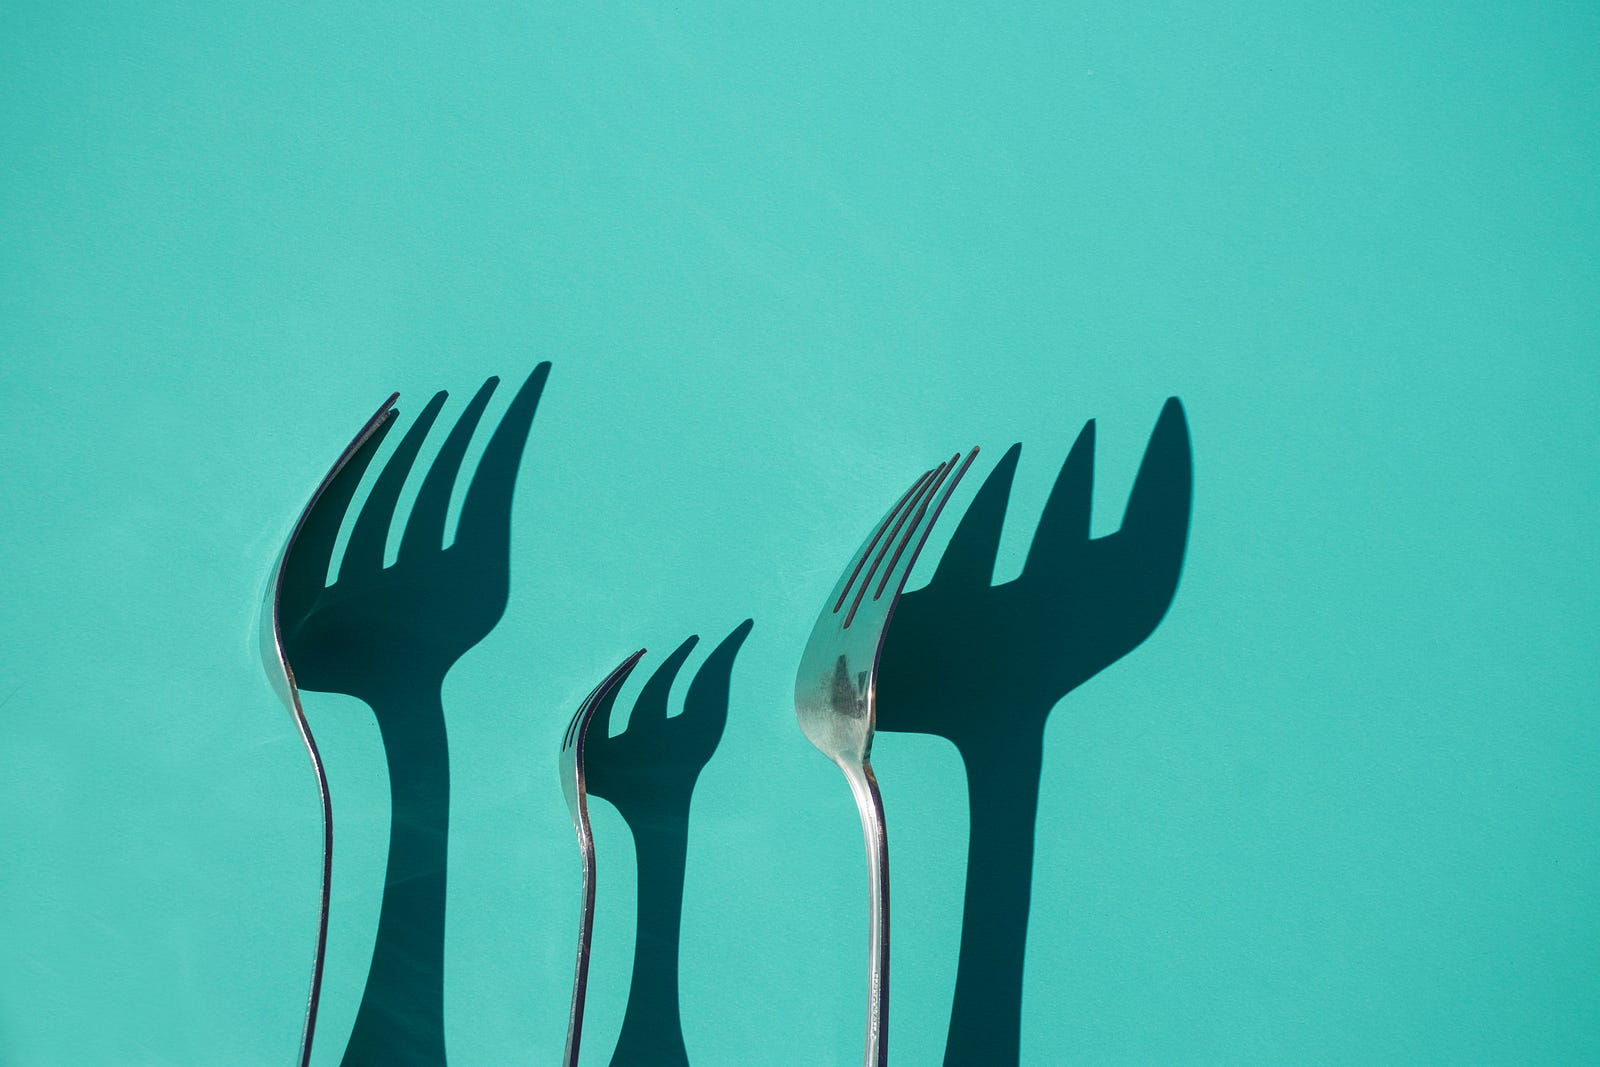 Three forks seen from the side, their big shadosw projecting against an aquamarine background. Subjects doing time-restricted eating consumed 425 fewer calories daily than those on no eating plan (the control group). They also lost about ten more pounds. Calorie counters consumed 405 fewer calories daily than controls.